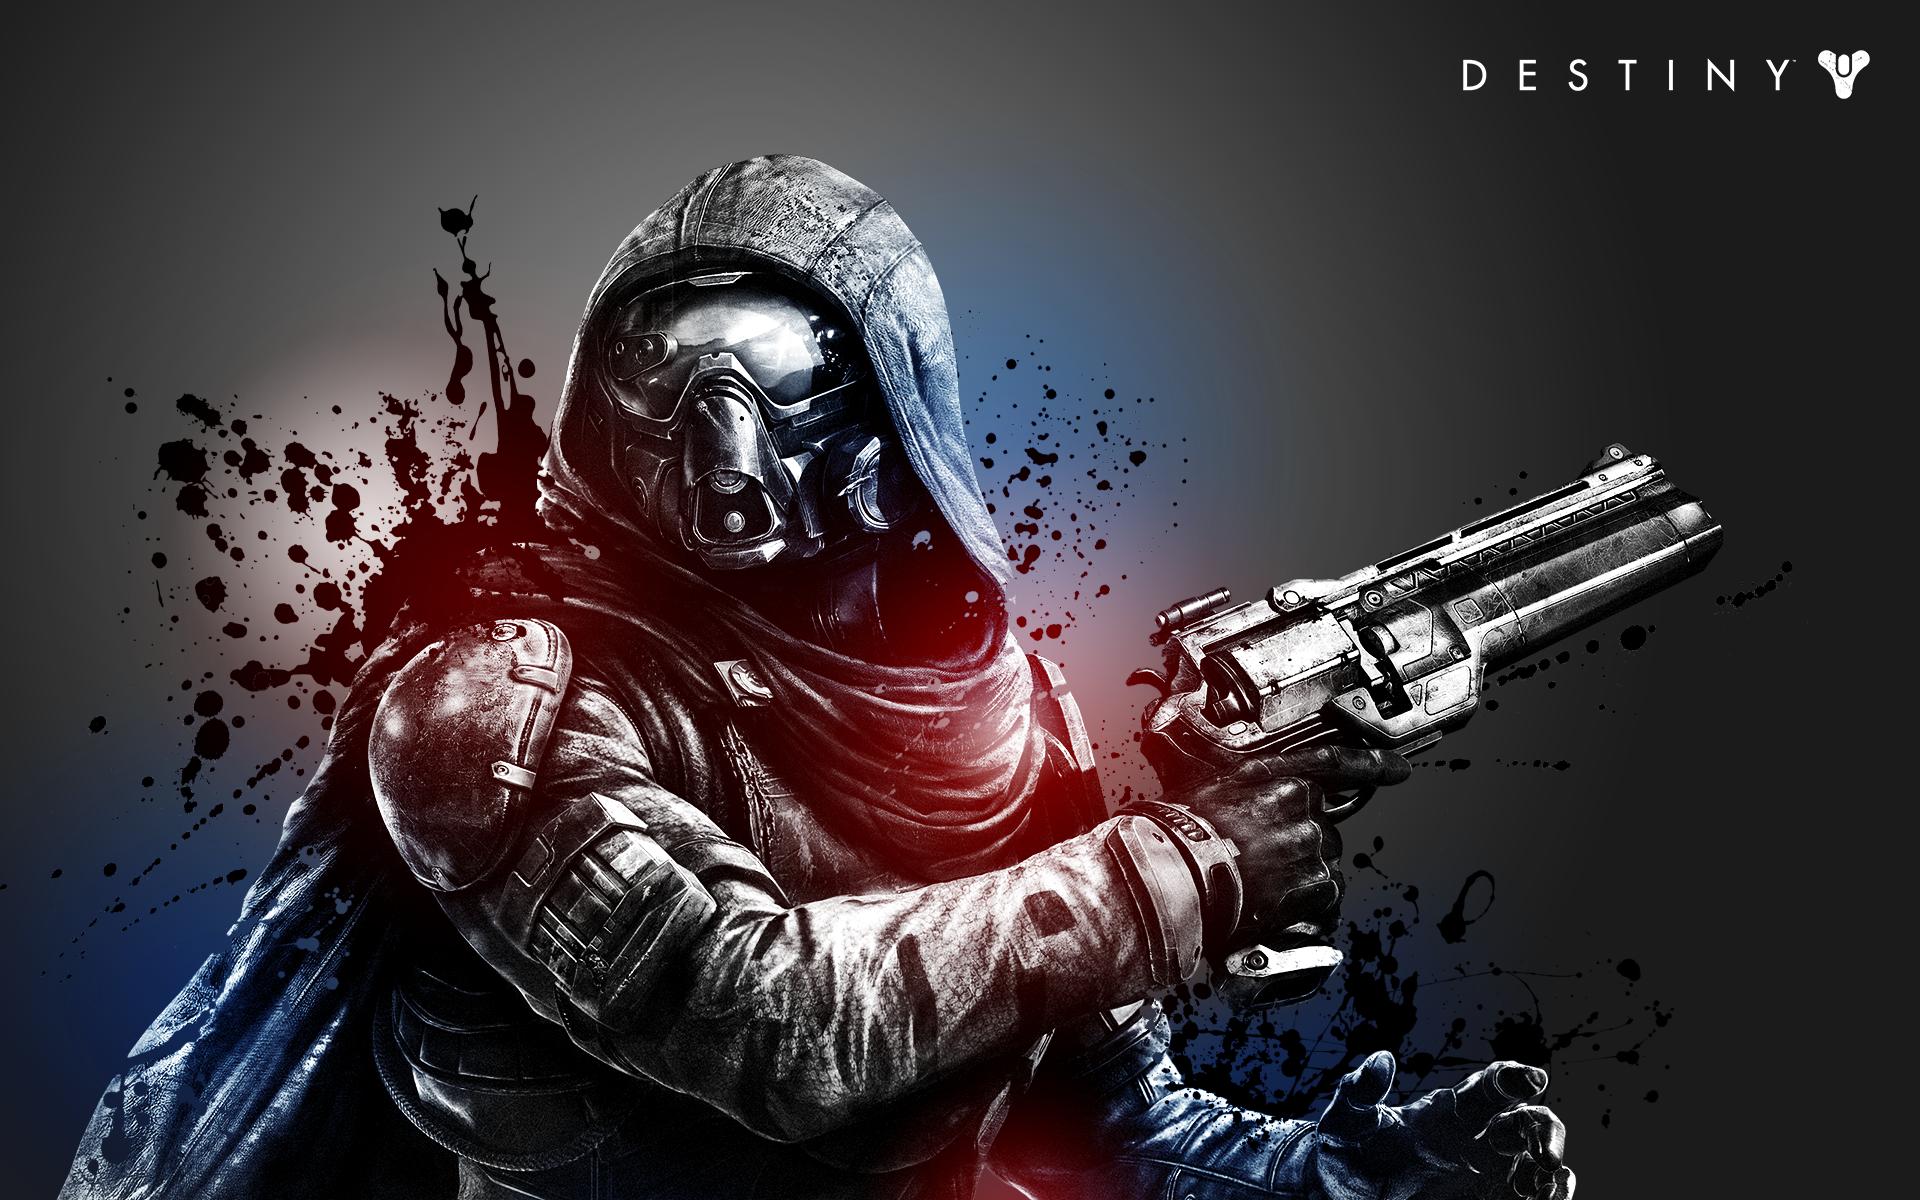 Awesome Destiny Wallpaper For Your Puter Tablet Or Phone Home